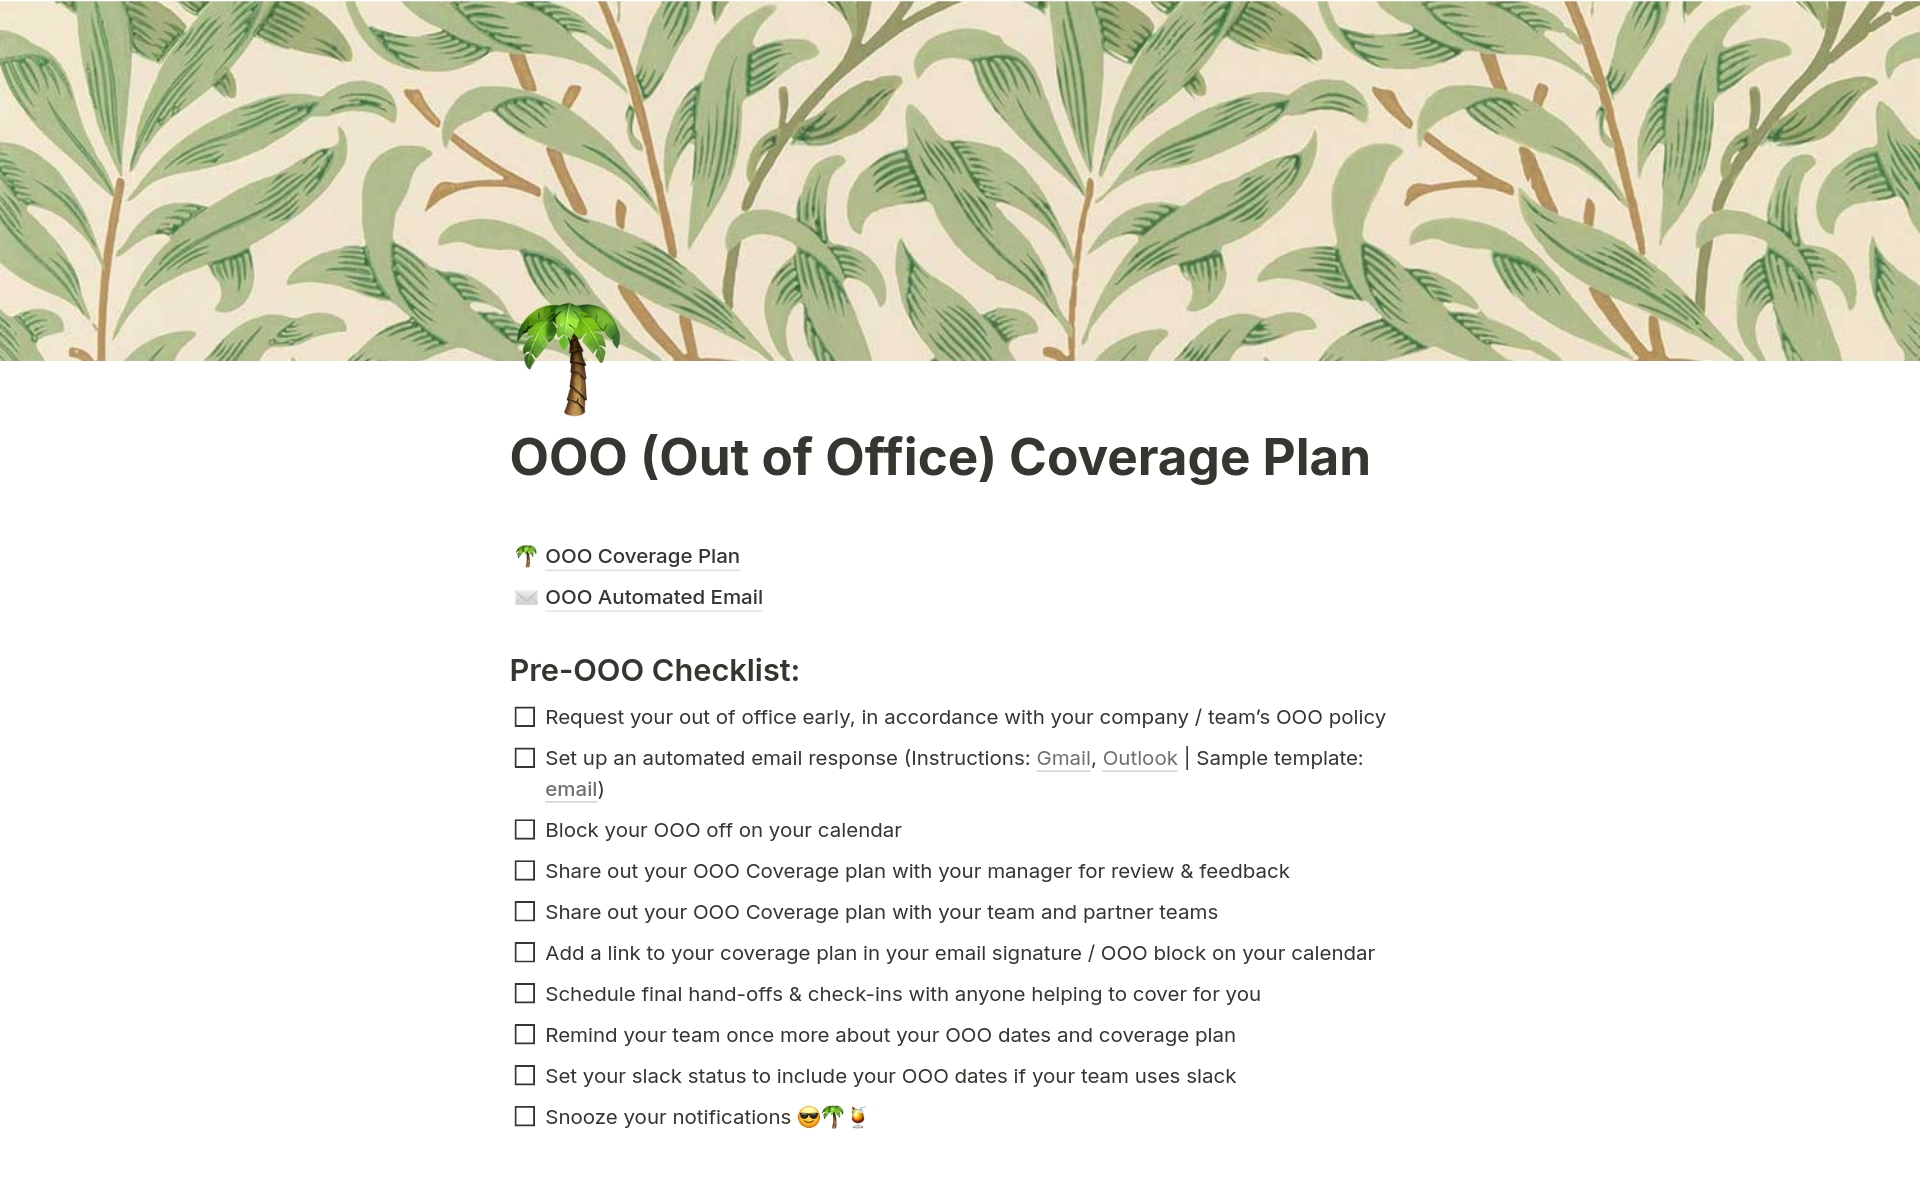 The OOO Coverage Plan template includes a pre-OOO checklist, an OOO email template, and an OOO Coverage Plan to fill in.